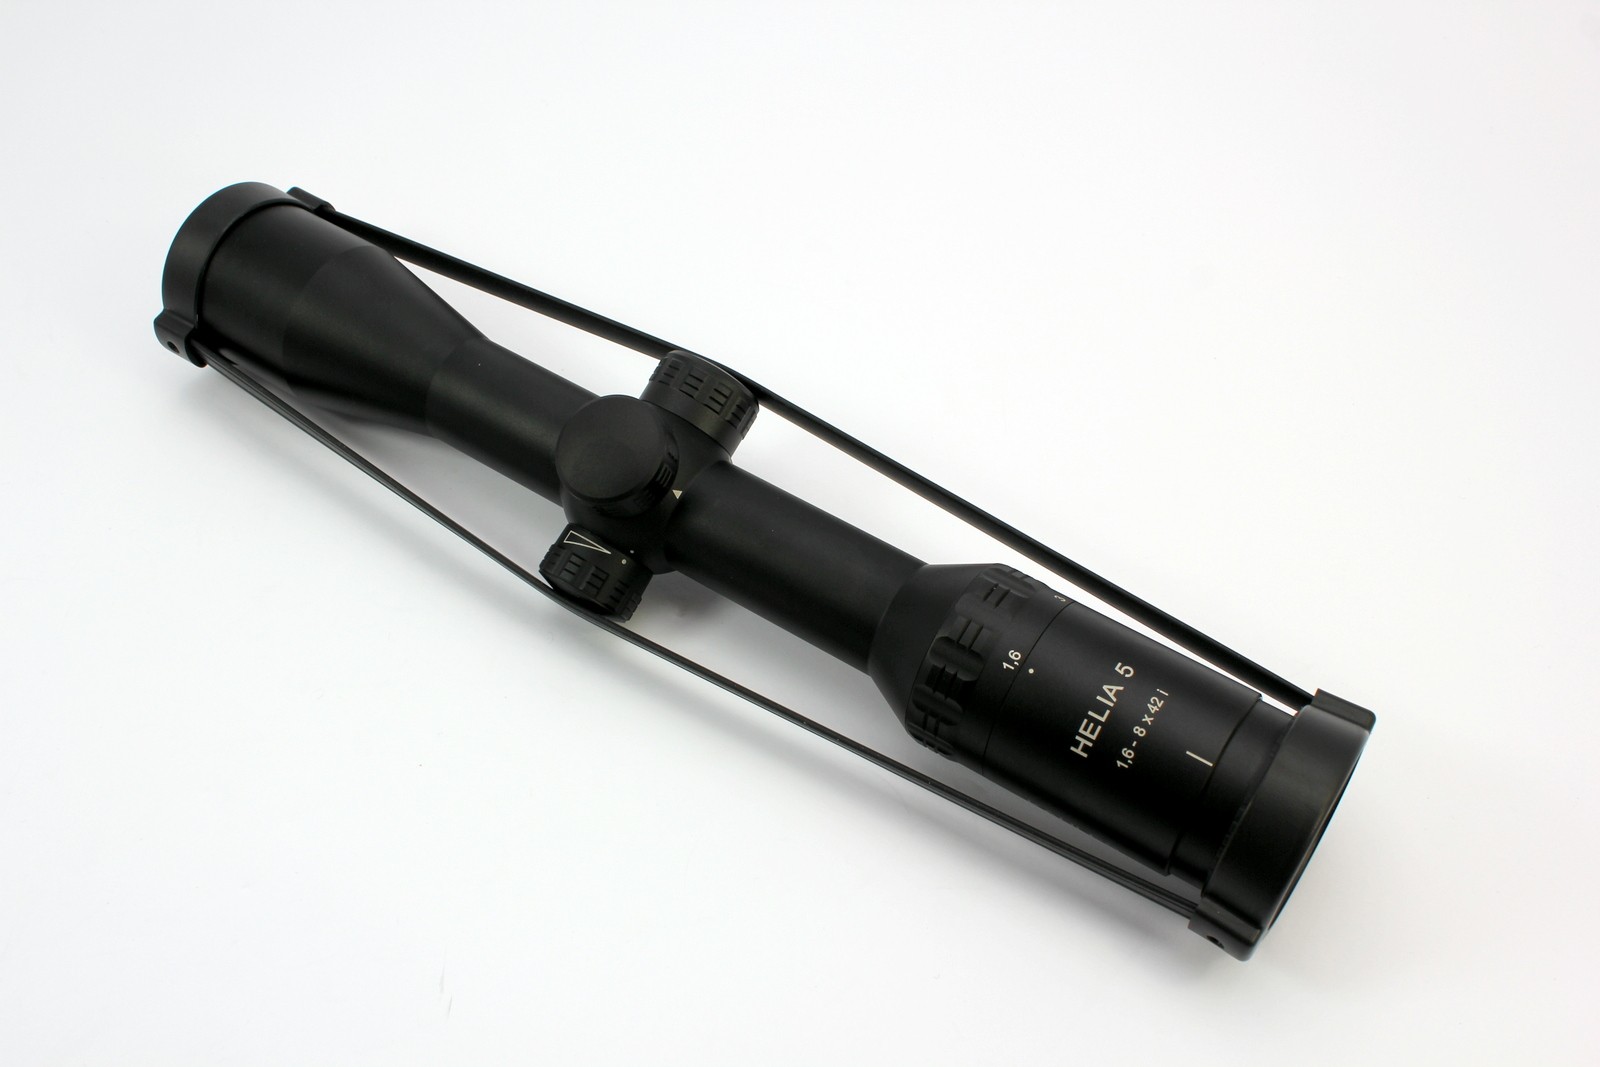 Top view of the Kahles 1.6-8x42i. Adjustment for the illuminated reticle is visible on left side of adjustment turret. (Picture courtesy of optics-info.com)